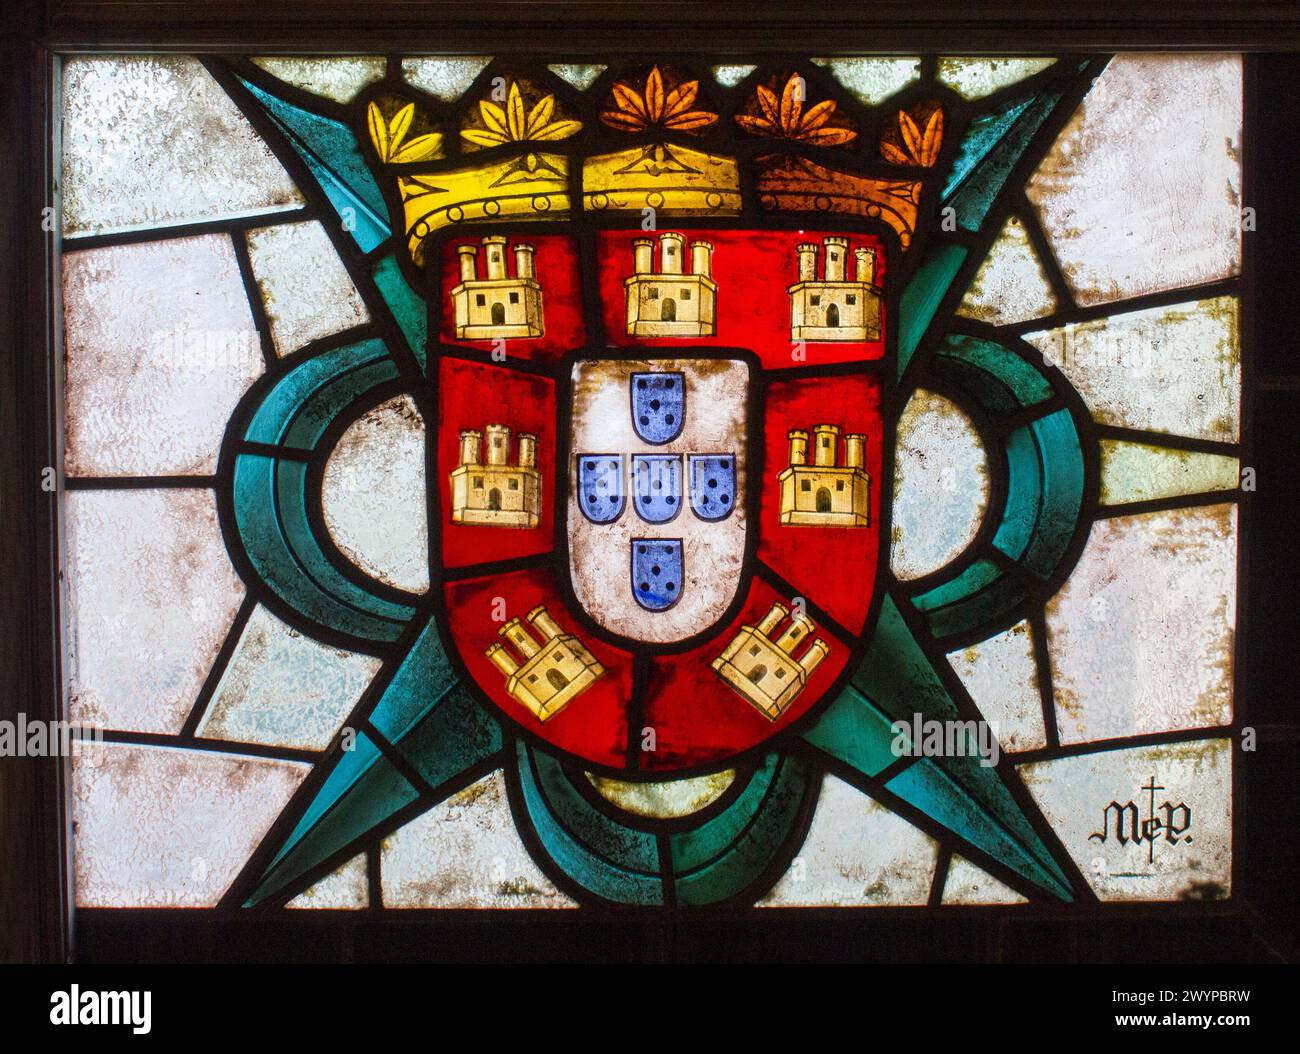 Coat of arms of the Kingdom of Portugal in a stained glass window of the Alcazar of Segovia Stock Photo